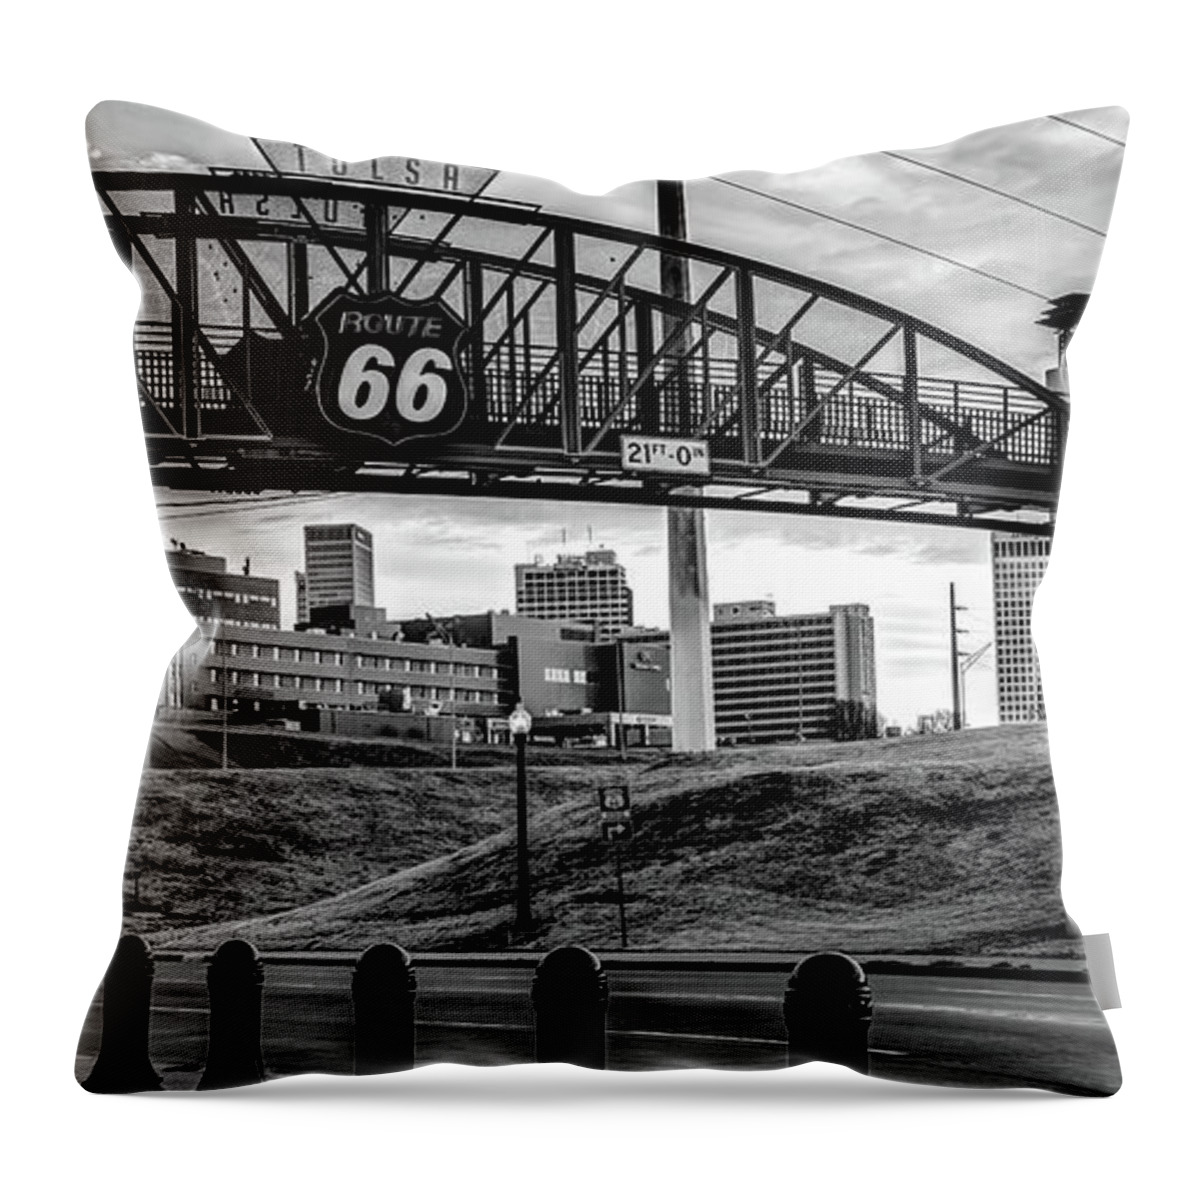 Route 66 Throw Pillow featuring the photograph Tulsa Route 66 Avery Plaza Bridge Monochrome Panorama by Gregory Ballos